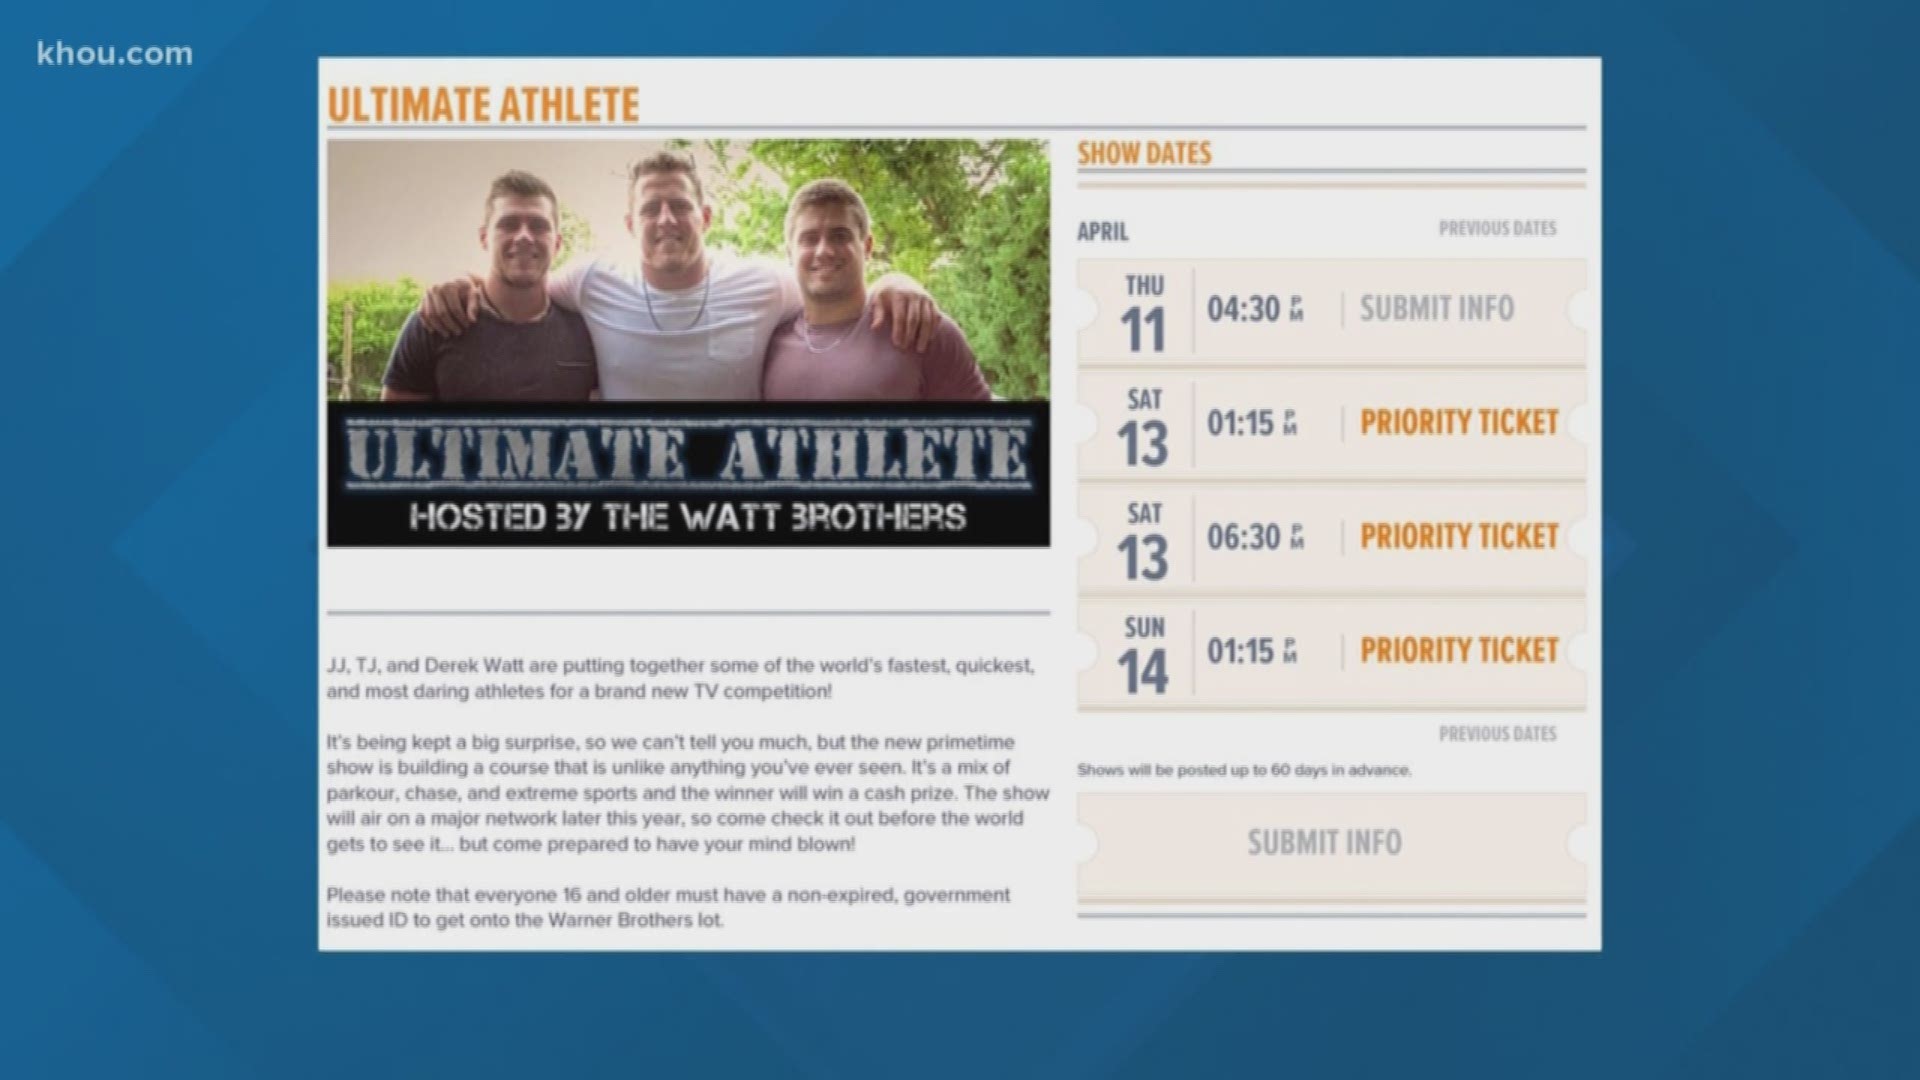 J.J. Watt, game show host? he and his brothers are hosting a new show called "Ultimate Athlete."